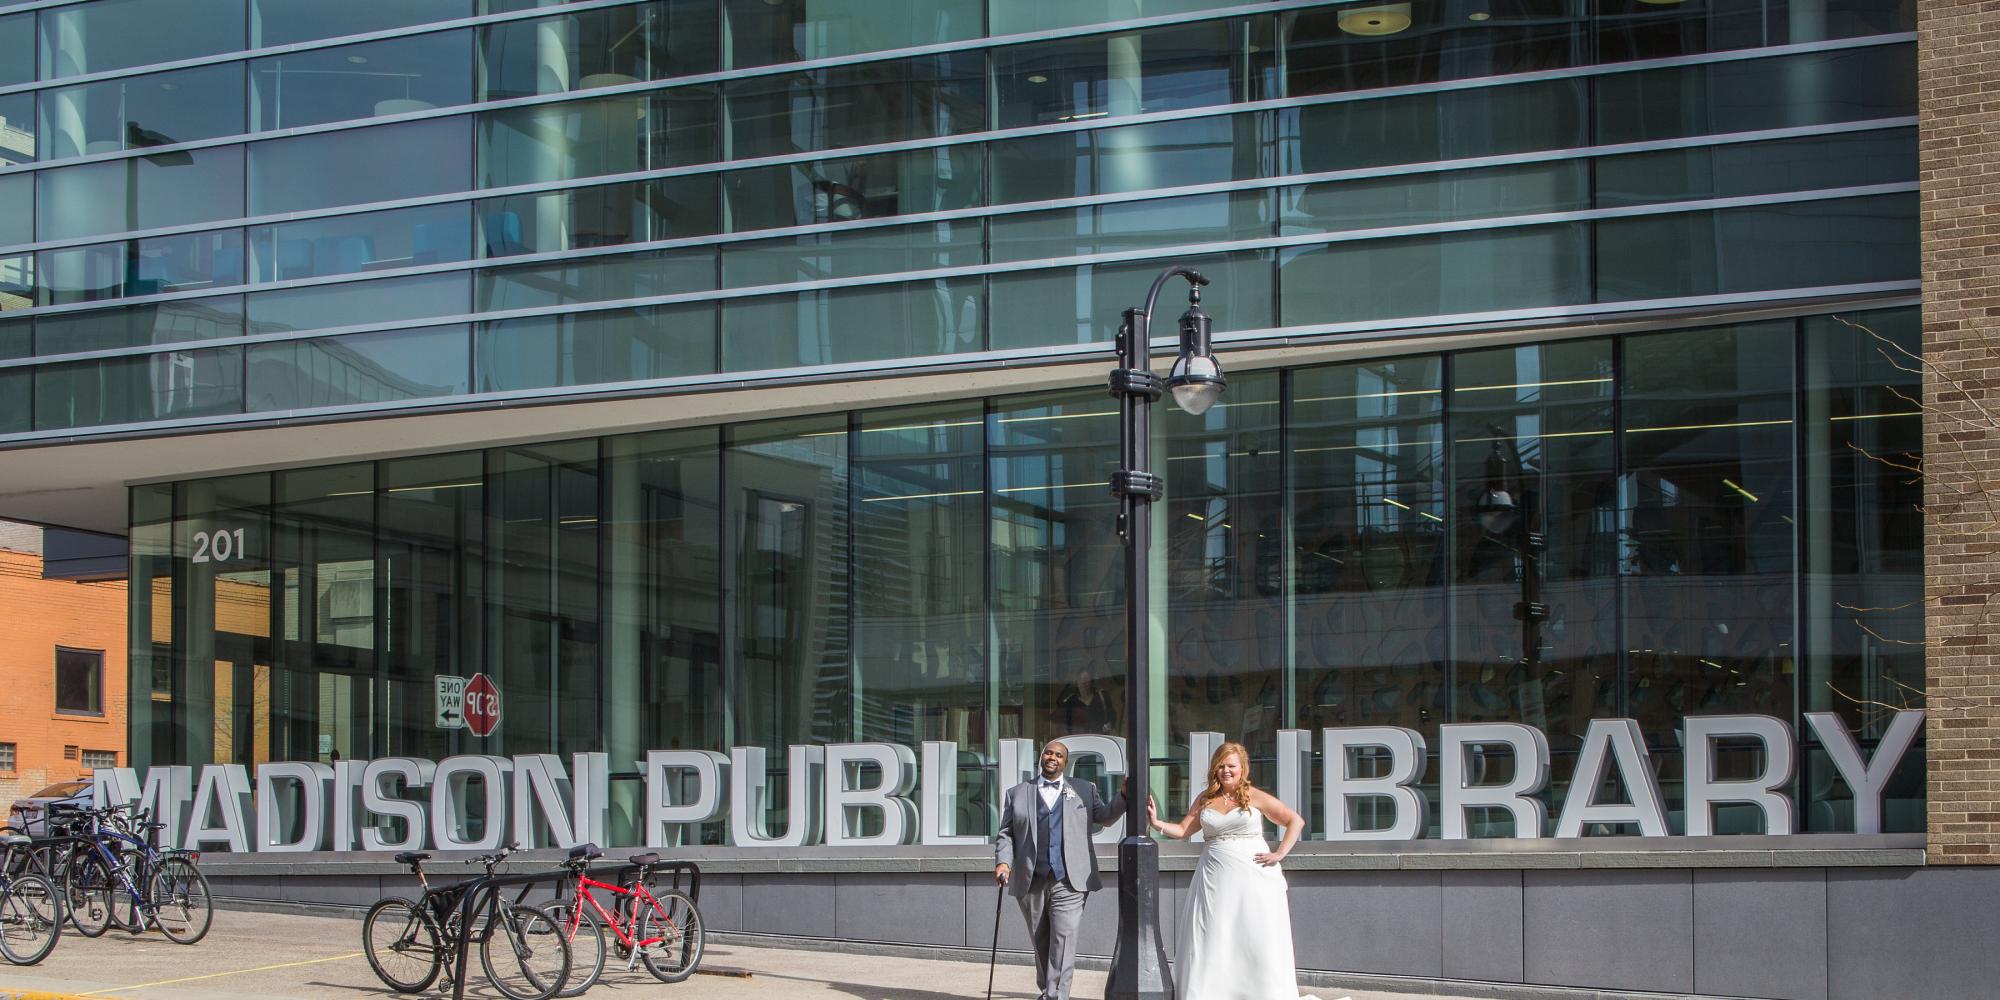 Bride & Groom posing in front of Madison Public Library Sign